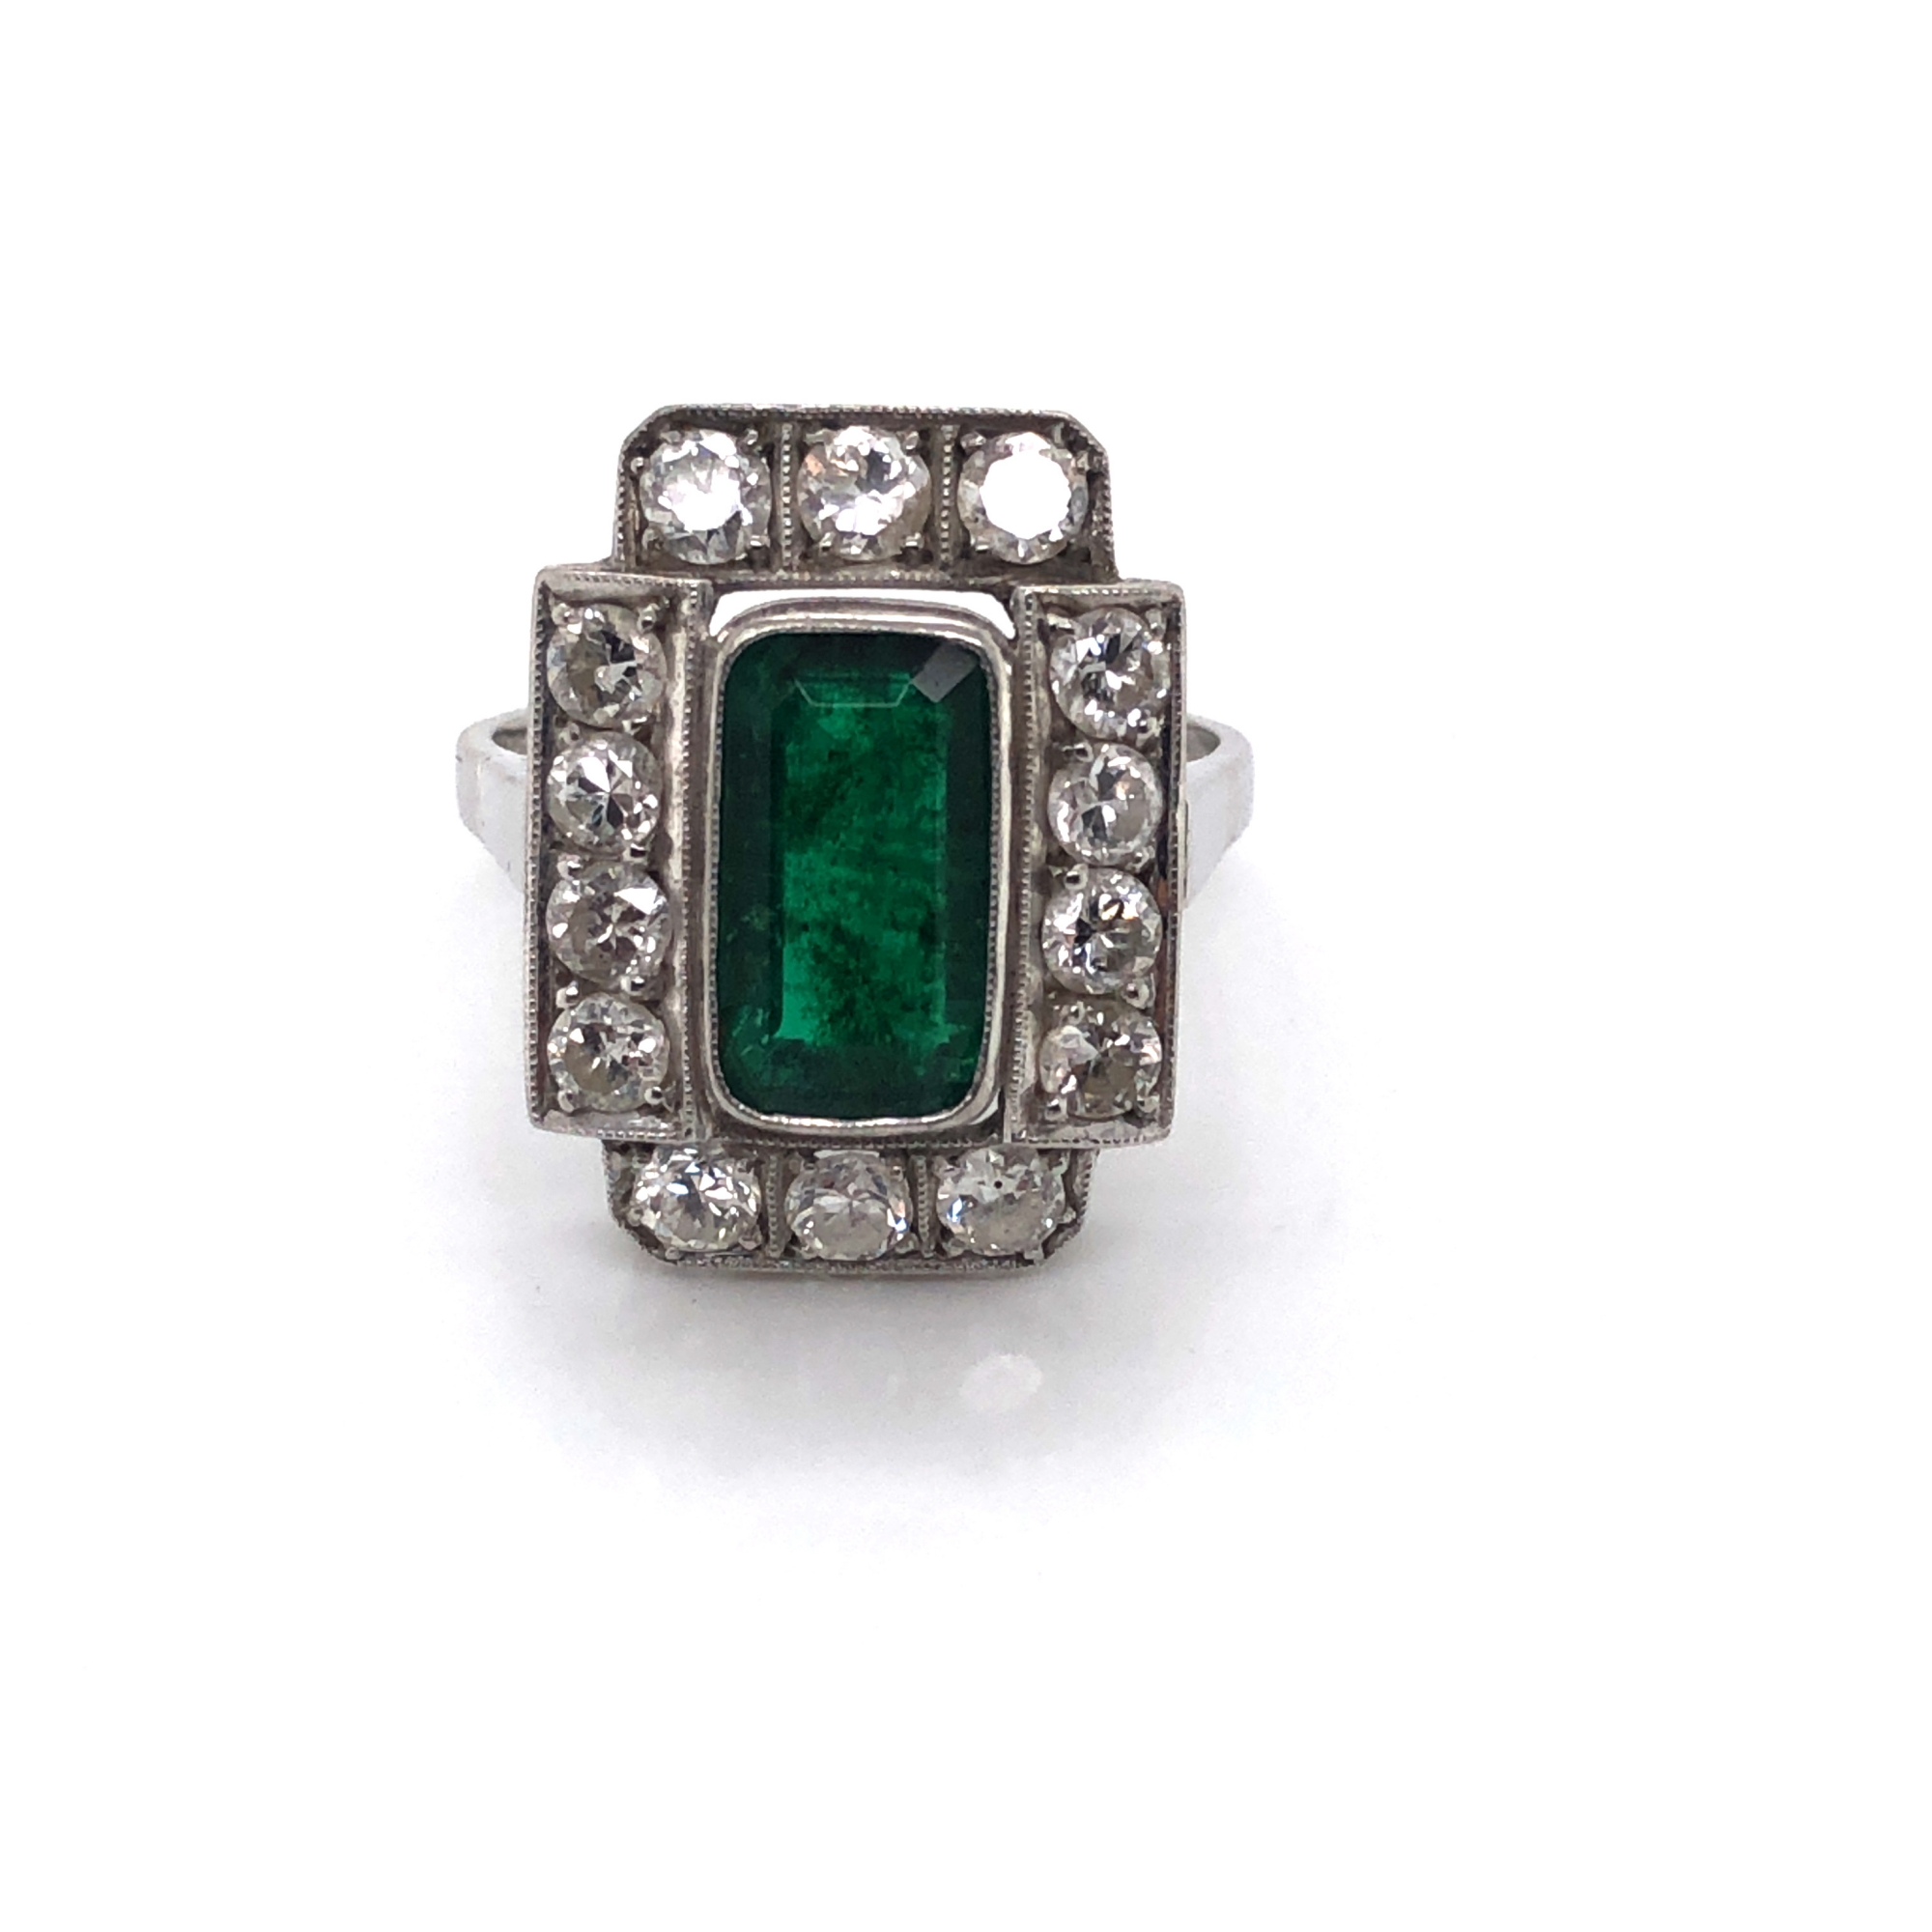 AN ART DECO EMERALD AND DIAMOND PANEL RING. THE LOZENGE SHAPE EMERALD APPROX 11 X 6mm, SURROUNDED BY - Image 6 of 10